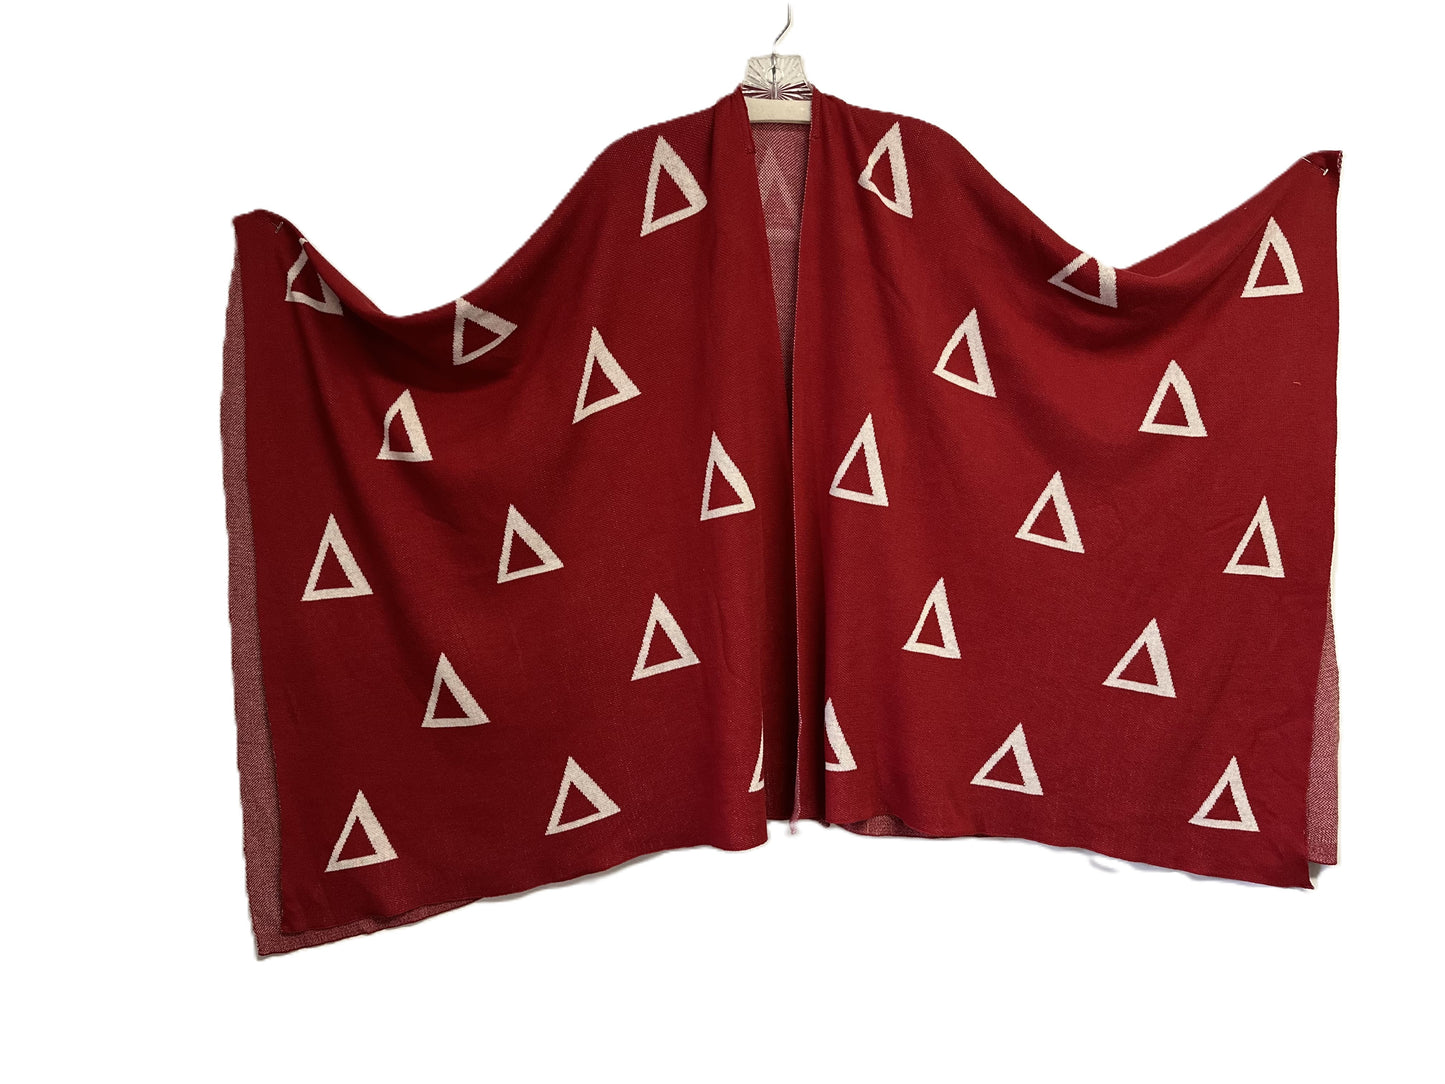 Delta Sigma Theta DST Red & White, Cozy Wrap/cape/shrug/poncho For Women, Size Fits All, Stylish, Made in INDIA